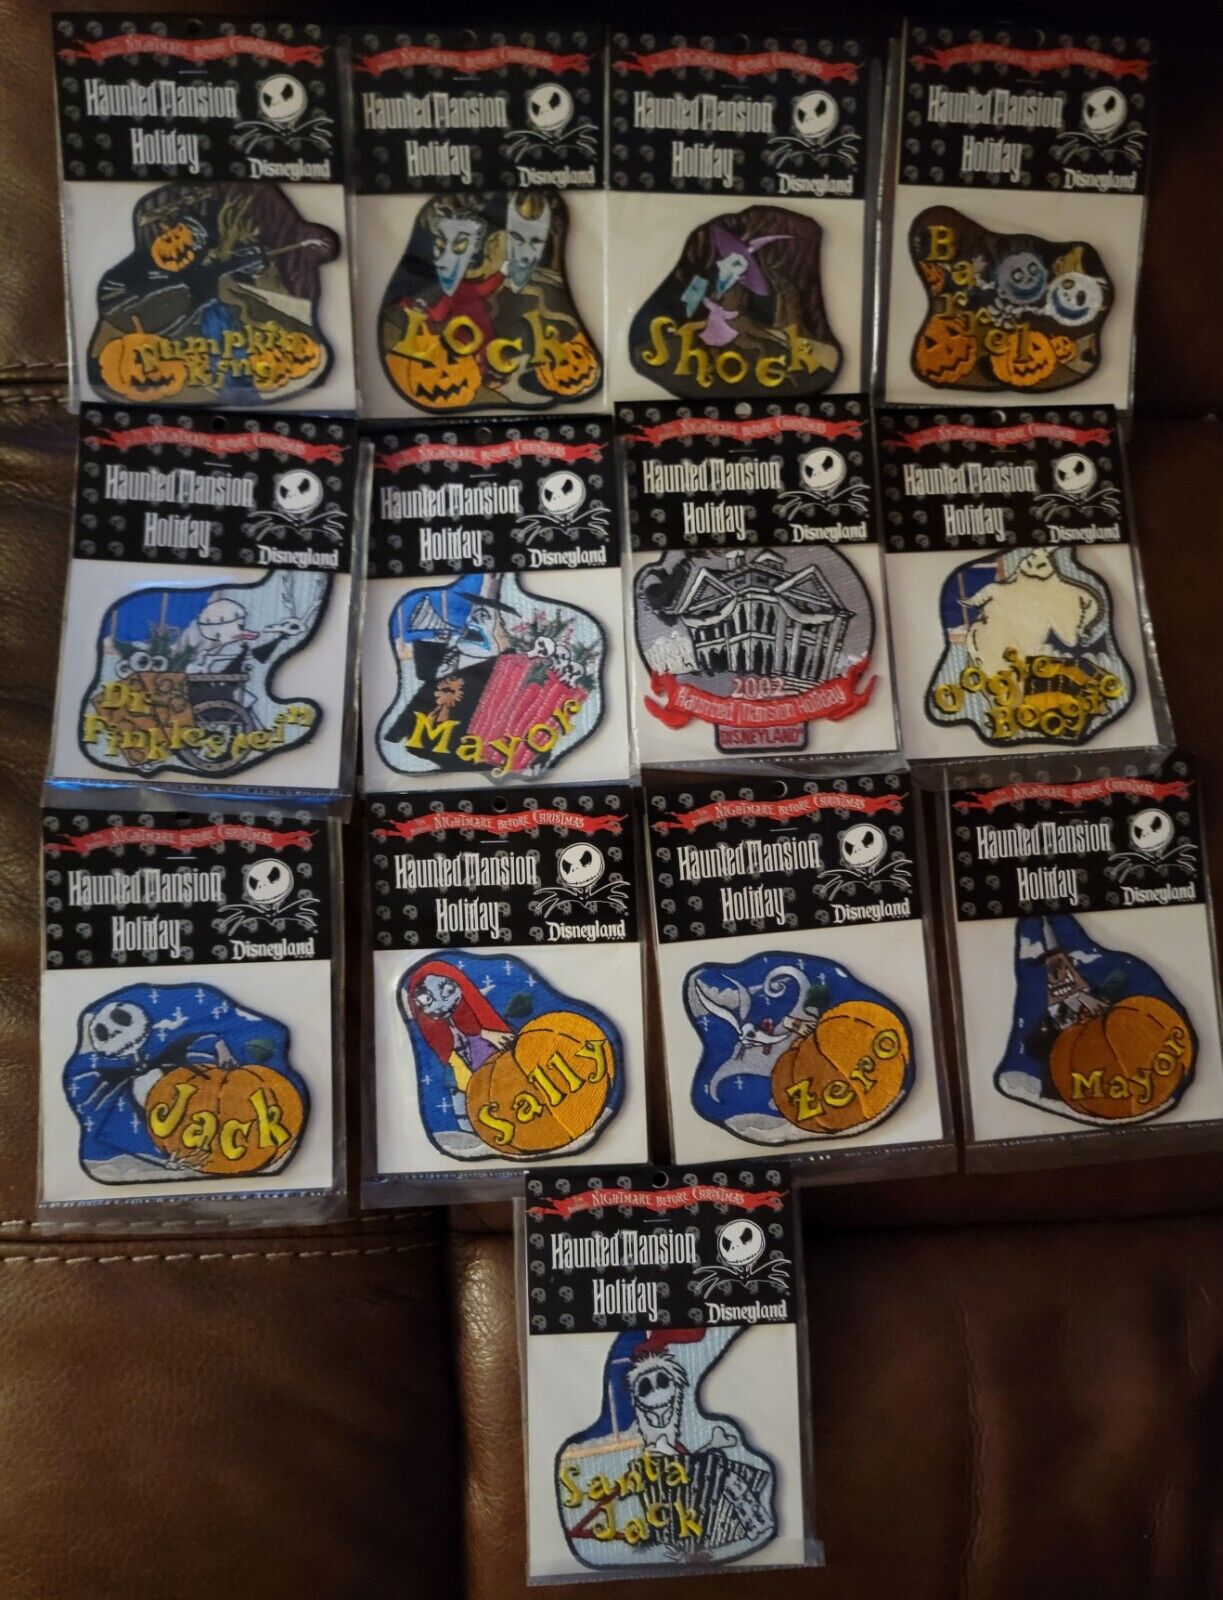 Disney Haunted Mansion Holiday NBC  Sew On Patches - 13 Patches In This Set